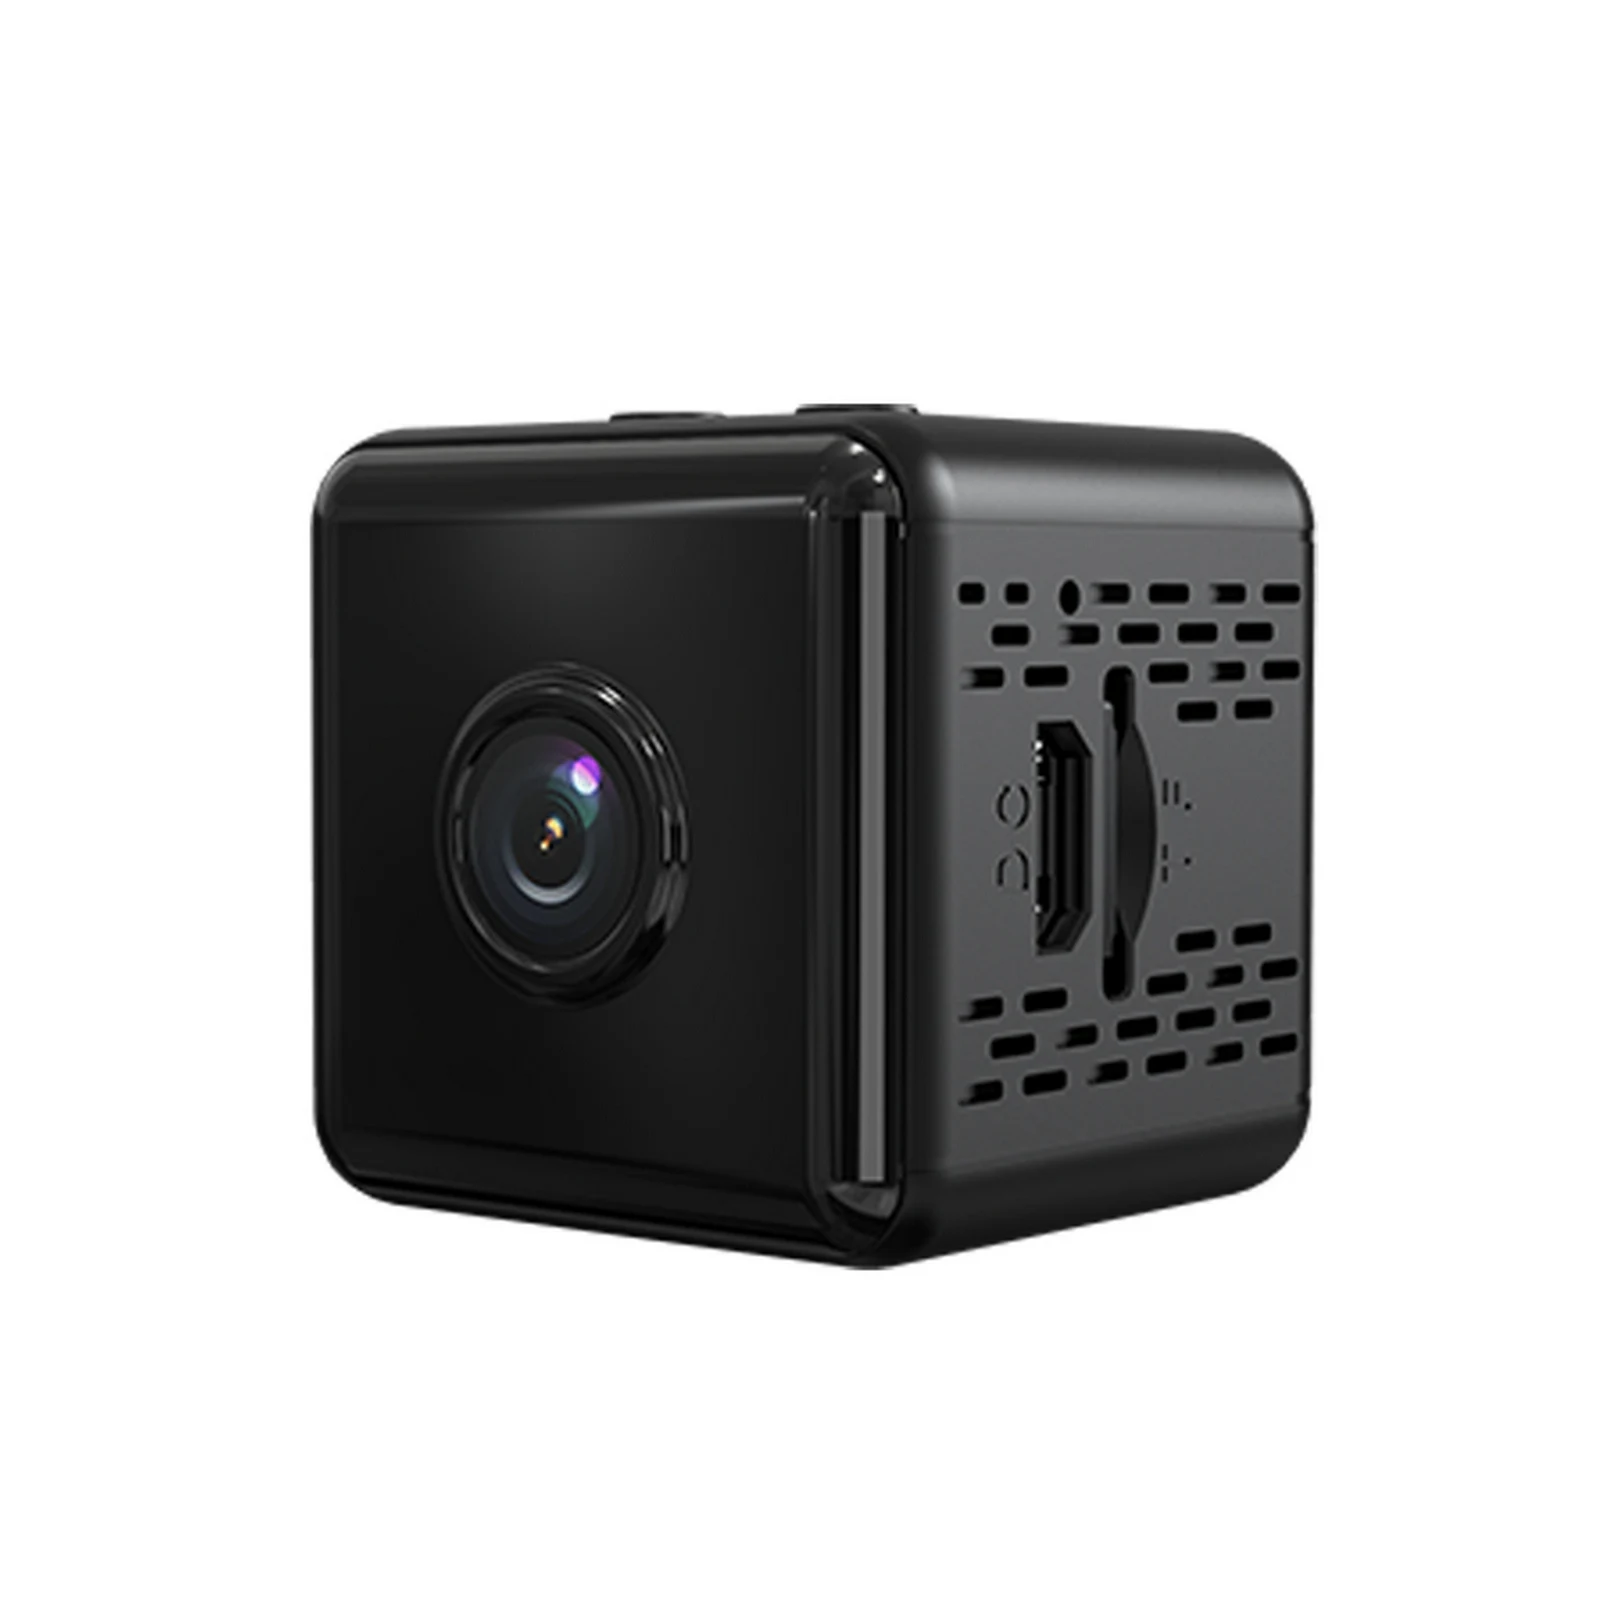 

X6D Wireless Mini WIFI Camera HD 1080P Home Security Night Vision Motion Surveillance Wide Angle Remote Monitor Video Recorder